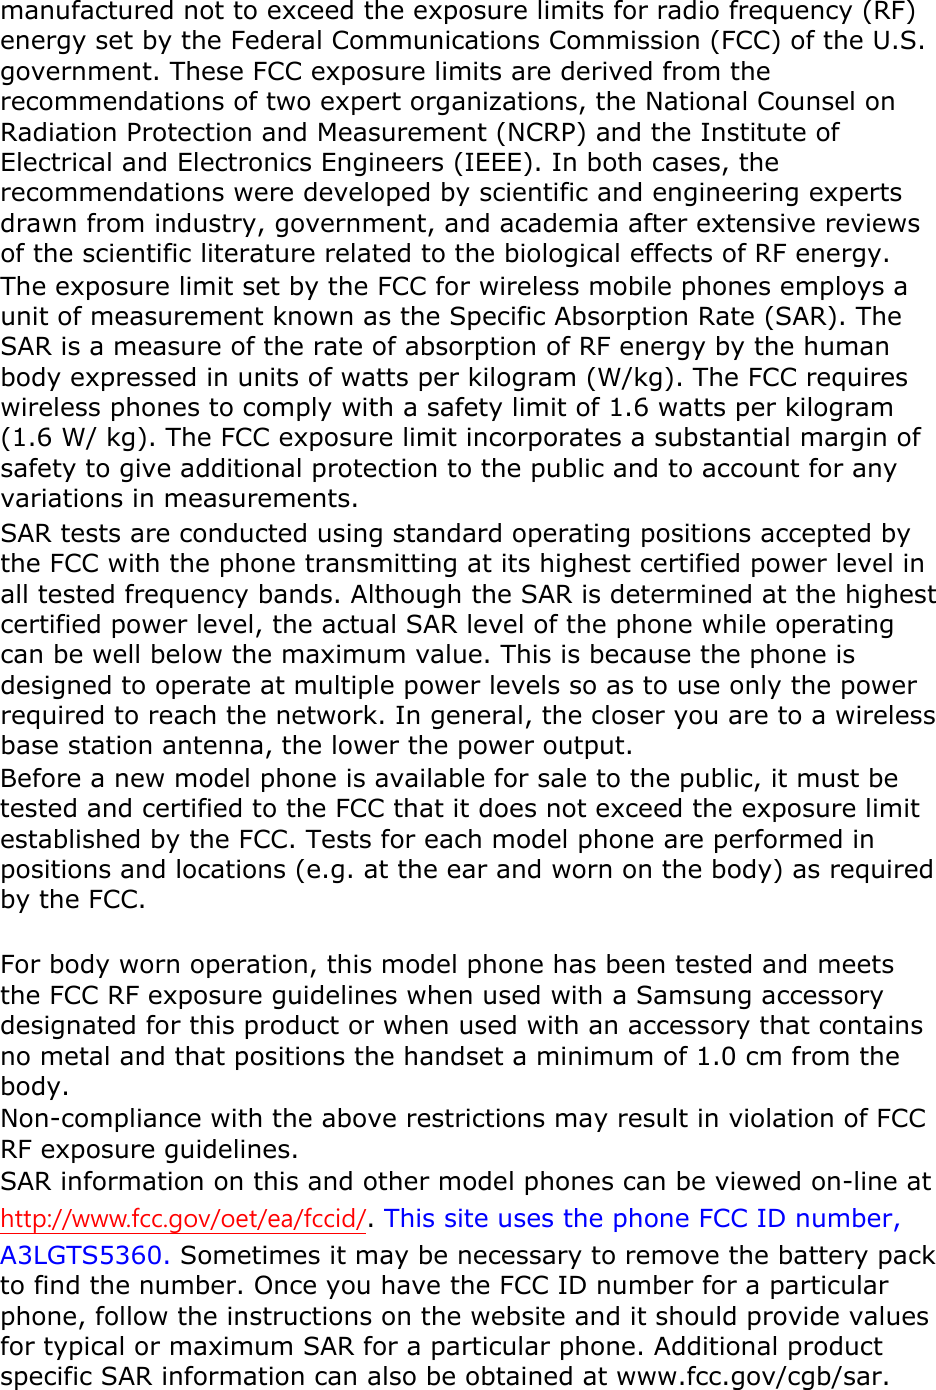 manufactured not to exceed the exposure limits for radio frequency (RF) energy set by the Federal Communications Commission (FCC) of the U.S. government. These FCC exposure limits are derived from the recommendations of two expert organizations, the National Counsel on Radiation Protection and Measurement (NCRP) and the Institute of Electrical and Electronics Engineers (IEEE). In both cases, the recommendations were developed by scientific and engineering experts drawn from industry, government, and academia after extensive reviews of the scientific literature related to the biological effects of RF energy.The exposure limit set by the FCC for wireless mobile phones employs a unit of measurement known as the Specific Absorption Rate (SAR). The SAR is a measure of the rate of absorption of RF energy by the human body expressed in units of watts per kilogram (W/kg). The FCC requires wireless phones to comply with a safety limit of 1.6 watts per kilogram (1.6 W/ kg). The FCC exposure limit incorporates a substantial margin of safety to give additional protection to the public and to account for any variations in measurements.SAR tests are conducted using standard operating positions accepted by the FCC with the phone transmitting at its highest certified power level in all tested frequency bands. Although the SAR is determined at the highest certified power level, the actual SAR level of the phone while operating can be well below the maximum value. This is because the phone is designed to operate at multiple power levels so as to use only the power required to reach the network. In general, the closer you are to a wireless base station antenna, the lower the power output. Before a new model phone is available for sale to the public, it must be tested and certified to the FCC that it does not exceed the exposure limit established by the FCC. Tests for each model phone are performed in positions and locations (e.g. at the ear and worn on the body) as required by the FCC.     For body worn operation, this model phone has been tested and meets the FCC RF exposure guidelines when used with a Samsung accessory designated for this product or when used with an accessory that contains no metal and that positions the handset a minimum of 1.0 cm from the body.Non-compliance with the above restrictions may result in violation of FCC RF exposure guidelines. SAR information on this and other model phones can be viewed on-line at http://www.fcc.gov/oet/ea/fccid/.This site uses the phone FCC ID number, A3LGTS5360. Sometimes it may be necessary to remove the battery pack to find the number. Once you have the FCC ID number for a particular phone, follow the instructions on the website and it should provide values for typical or maximum SAR for a particular phone. Additional product specific SAR information can also be obtained at www.fcc.gov/cgb/sar. 